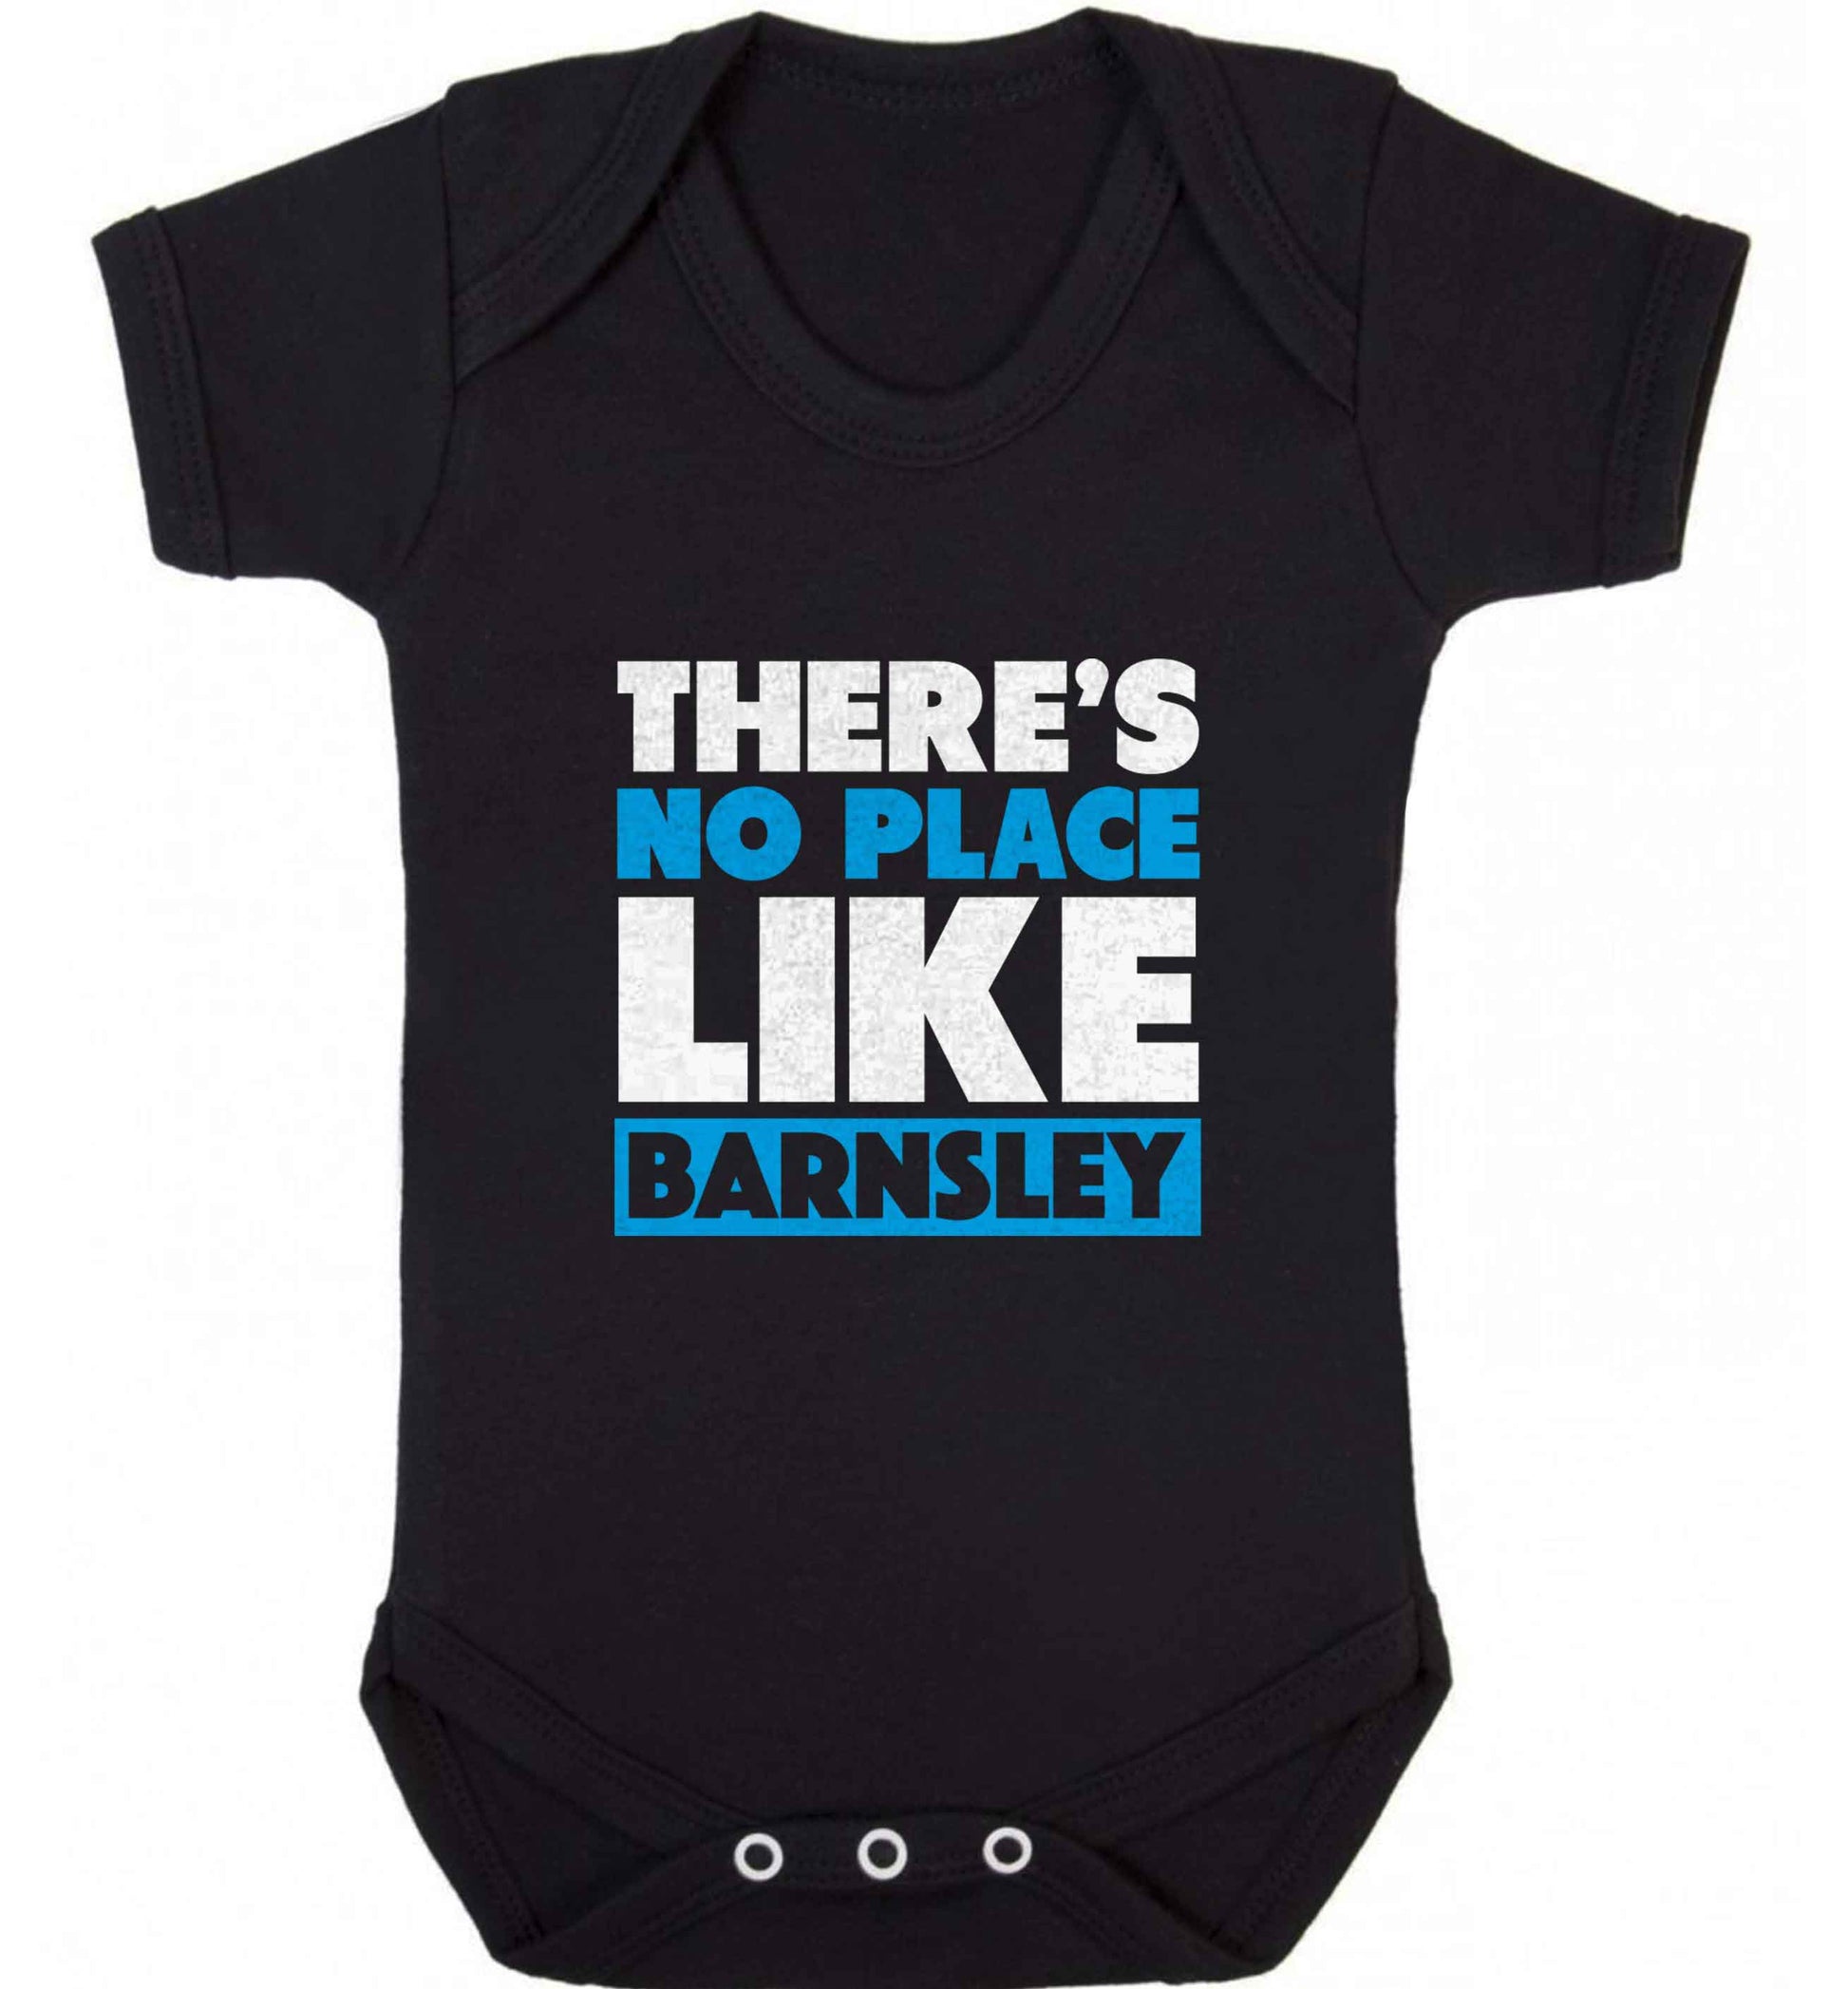 There's No Place Like Barnsley baby vest black 18-24 months